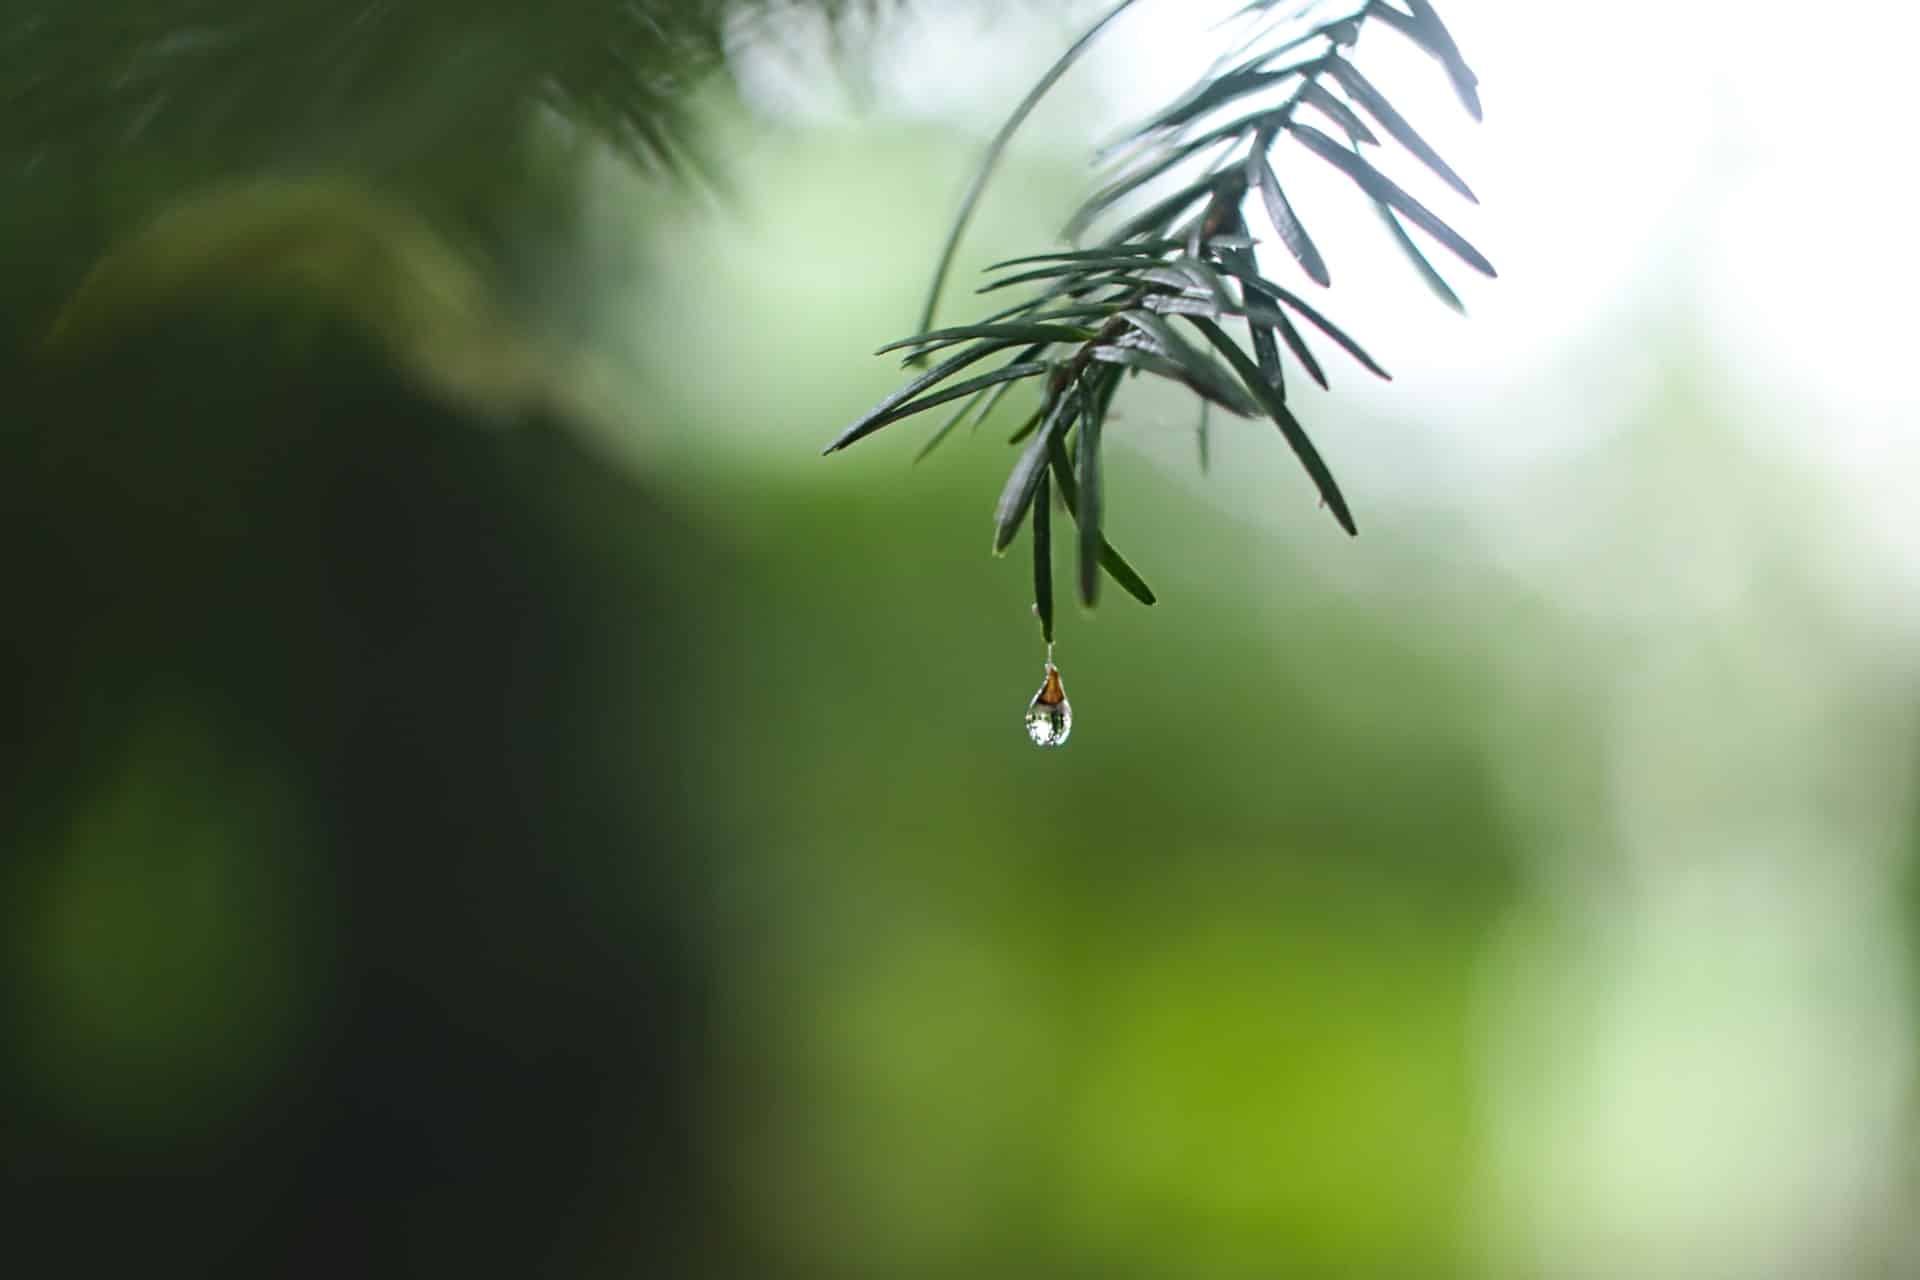 Rain droplets on pine needles in a forest